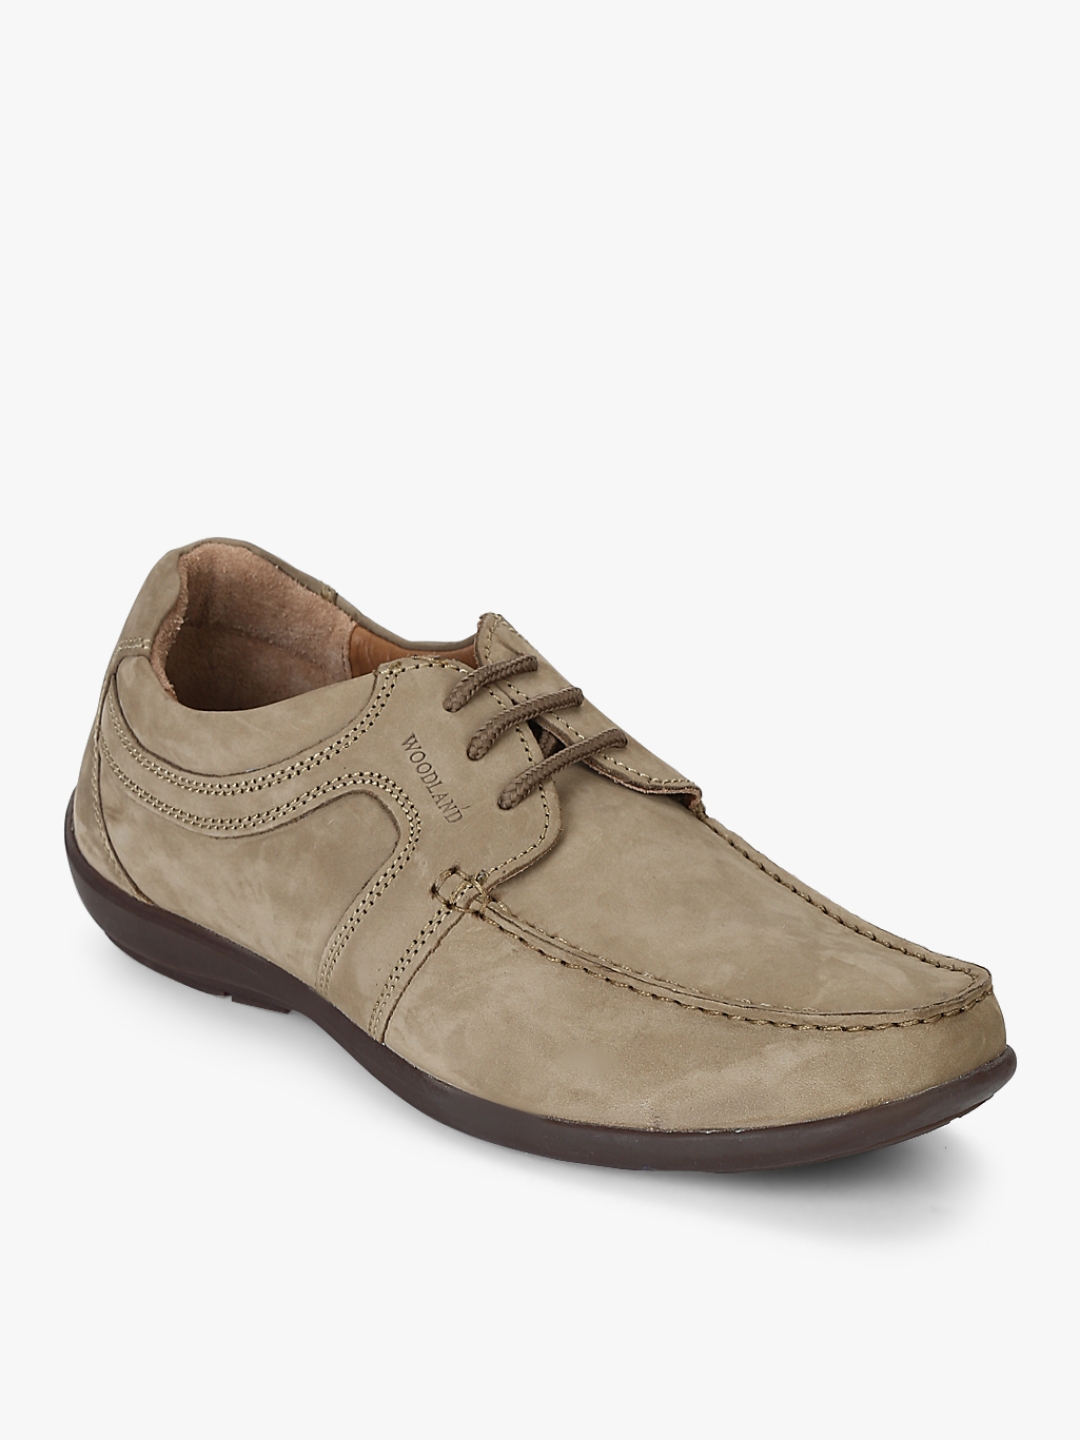 92  Casual dress shoes with khakis for Women